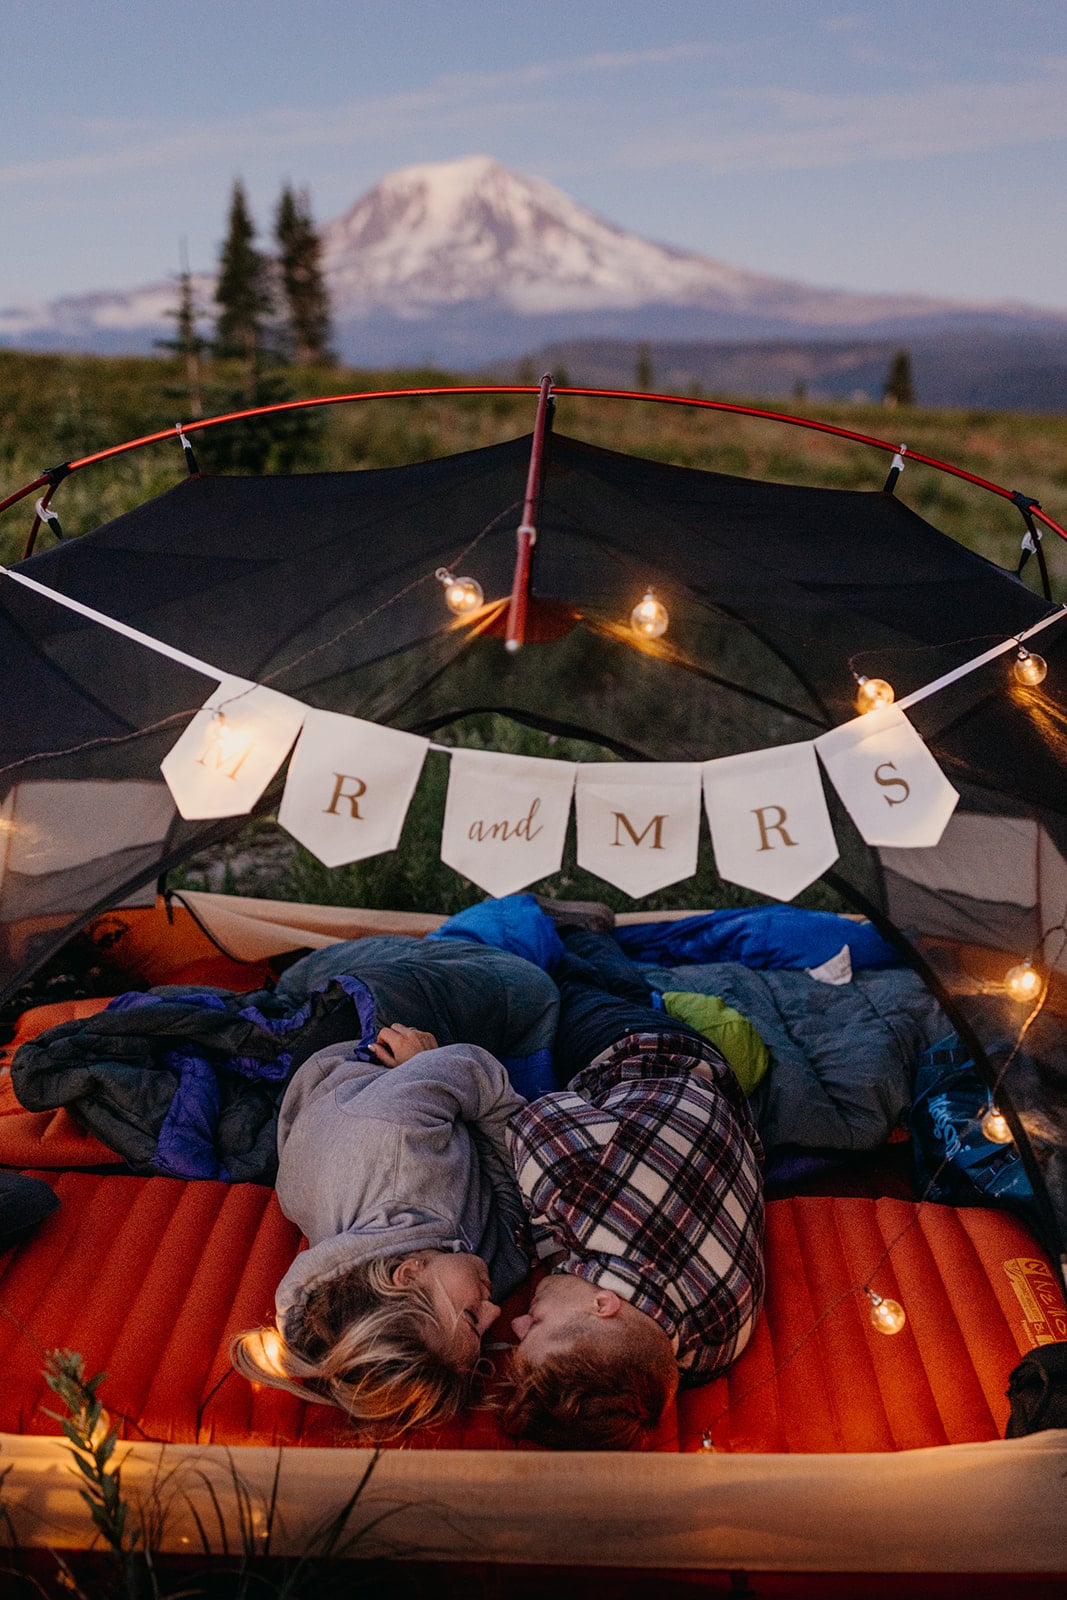 A couple lays in a tent together near a mountain with their just married sign.